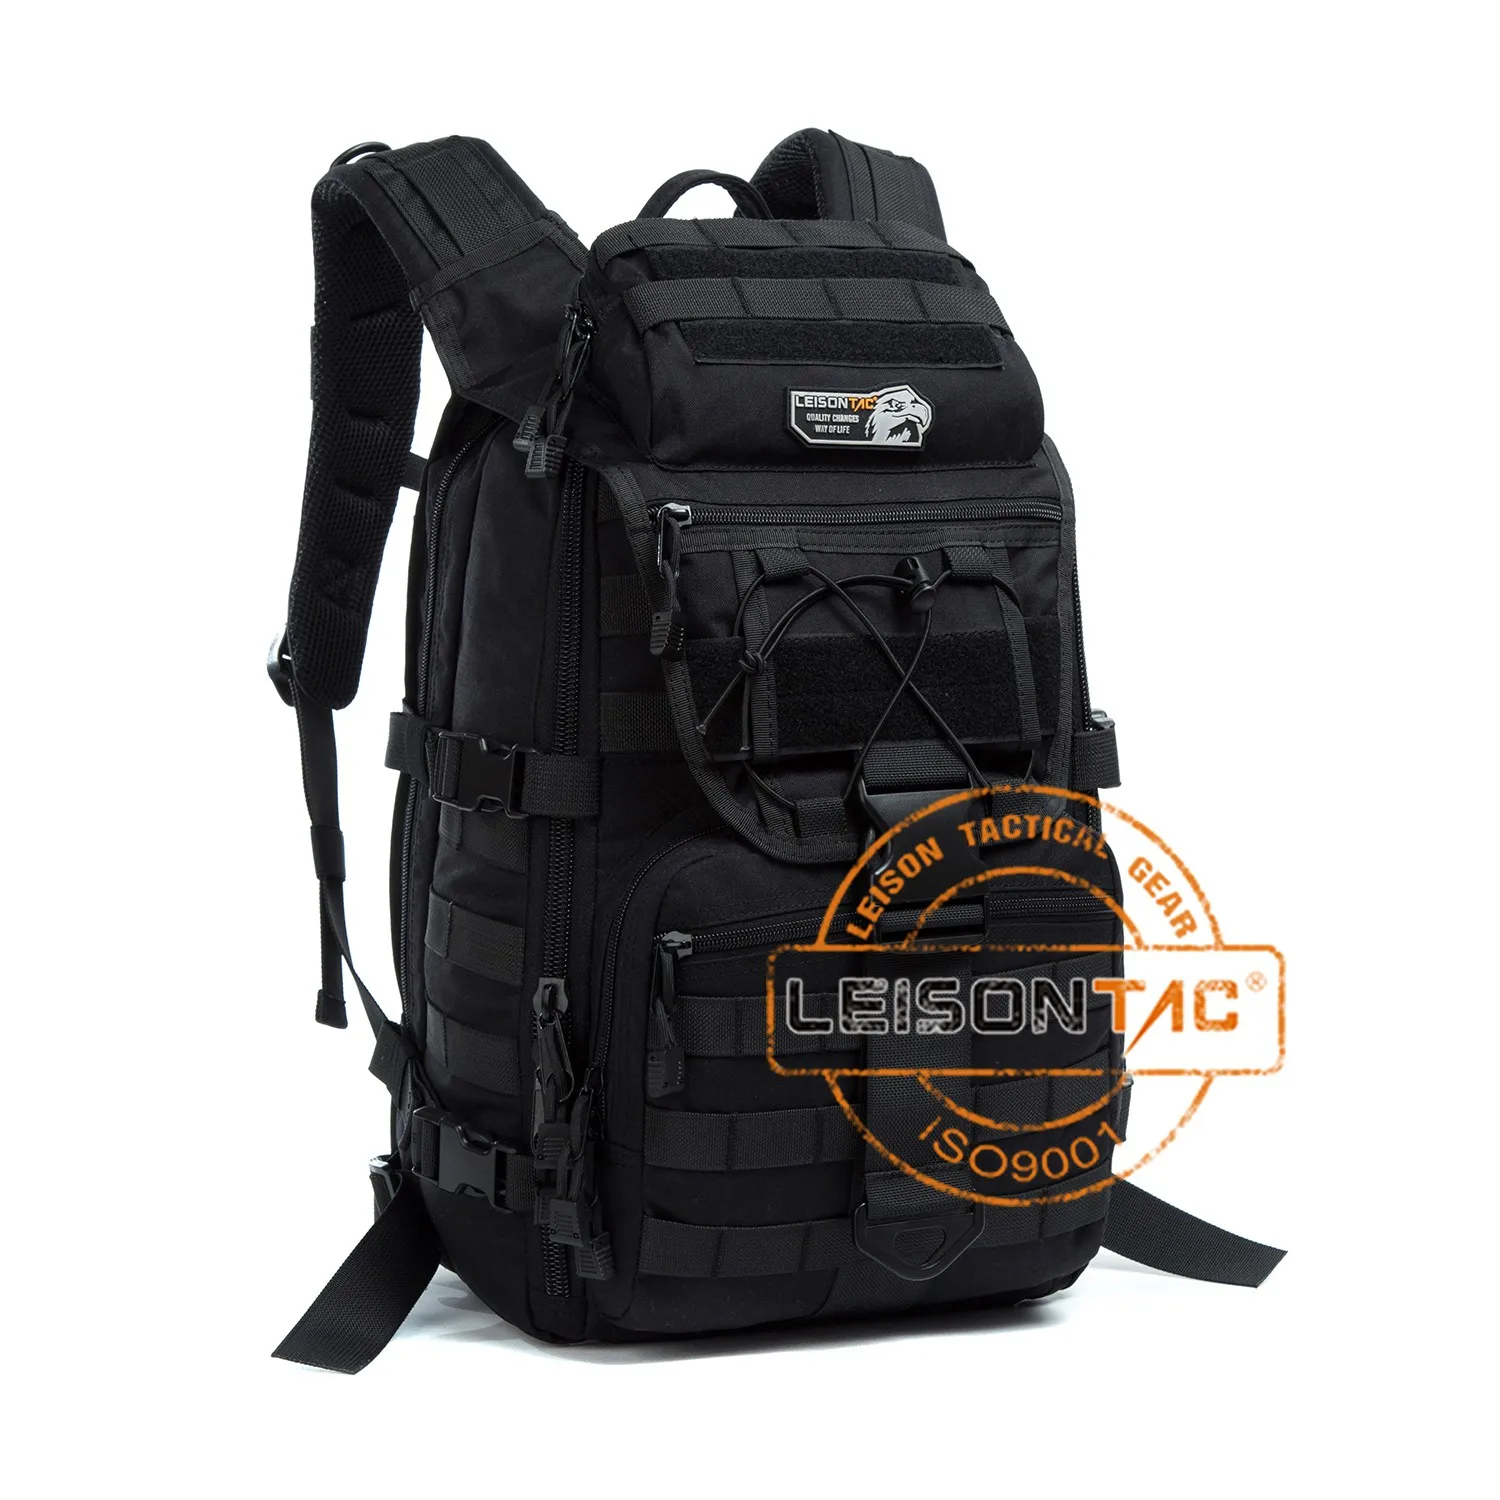 500D waterproof Nylon Tactical Outdoor Backpack large Capacity with ISO standard for tactical hiking outdoor travel